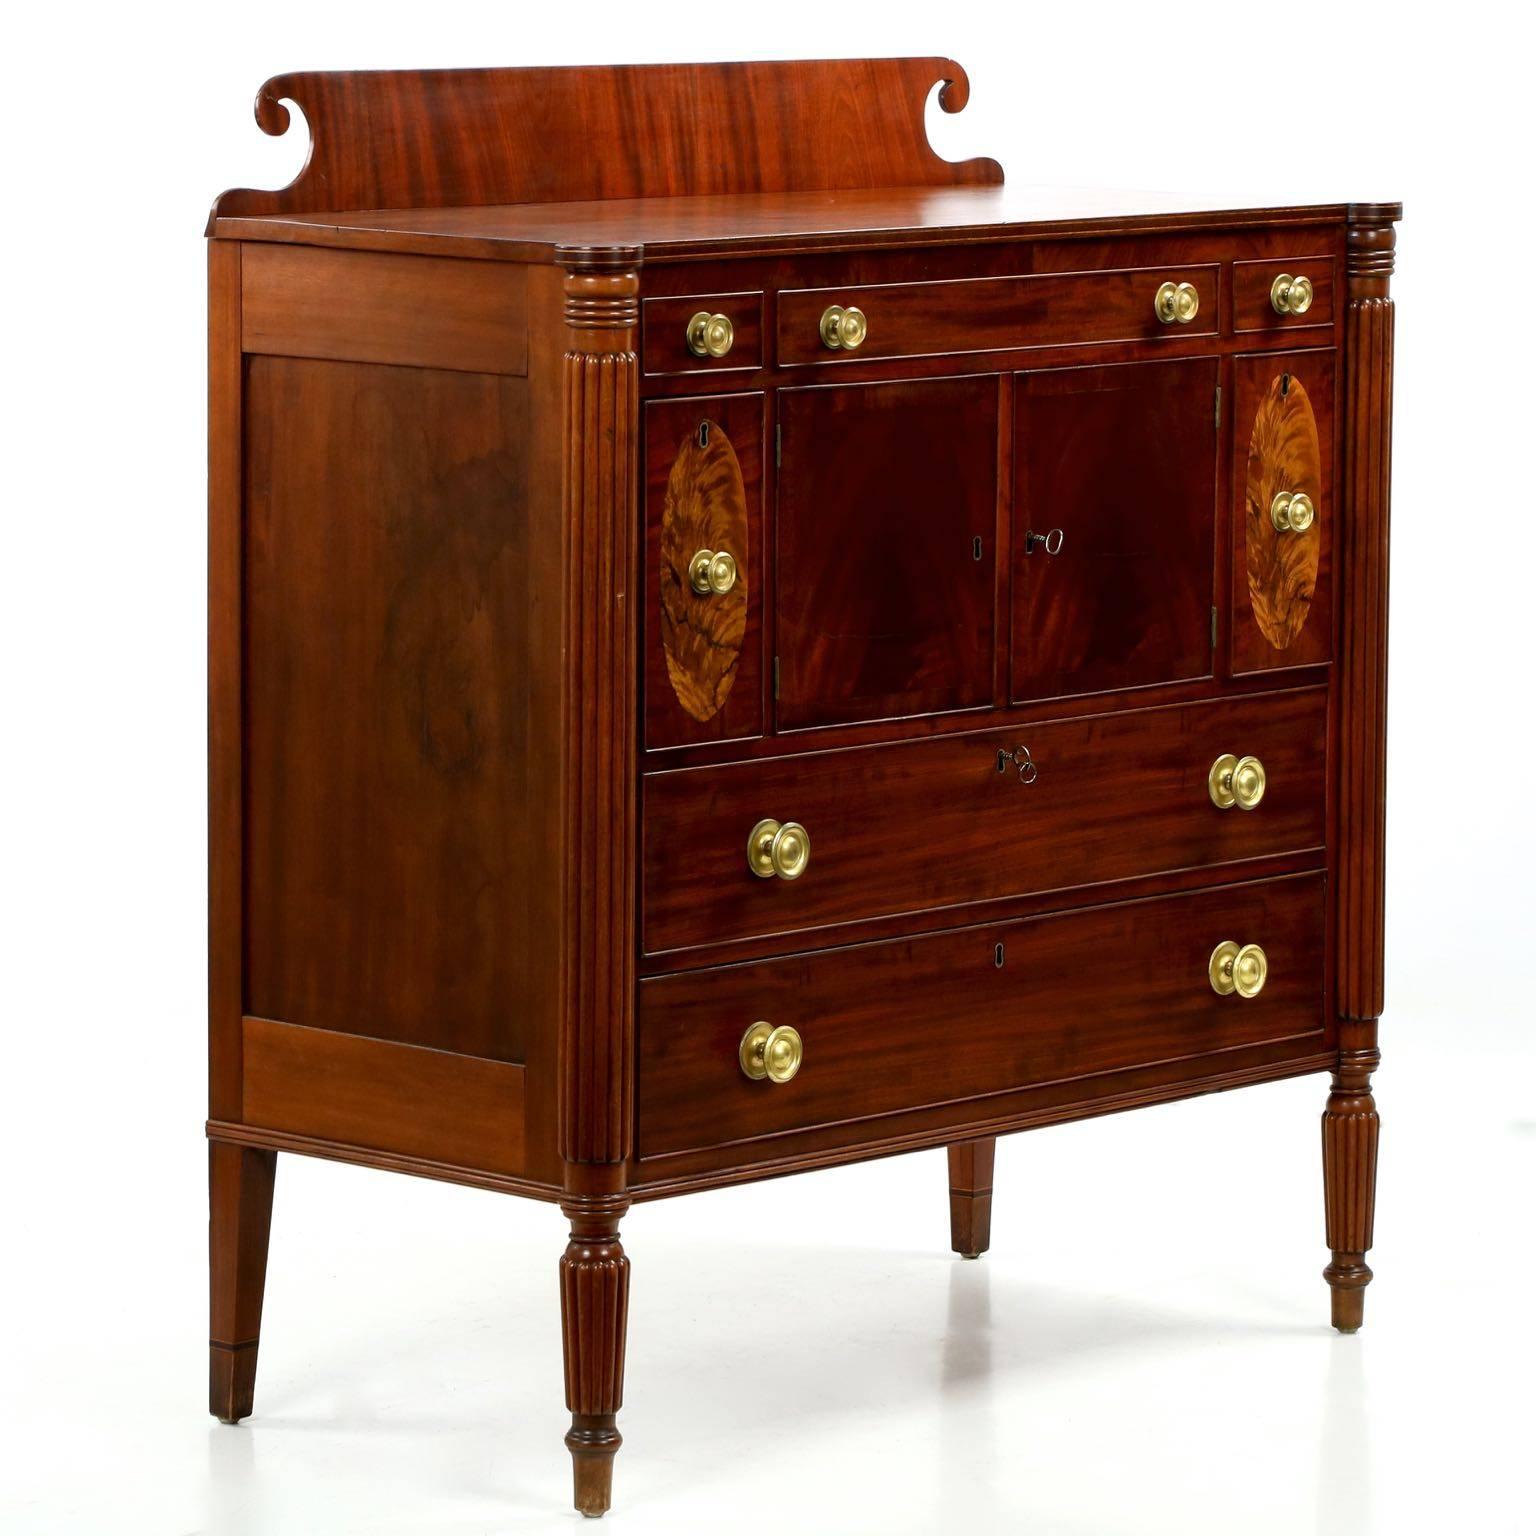 A work of highly precise and imaginative craftsmanship, the casework on this chest of drawers is simply outstanding, the underside of the case shows large dovetails locking tenon-mortised frame of the sides into the bottom while large fore-aft